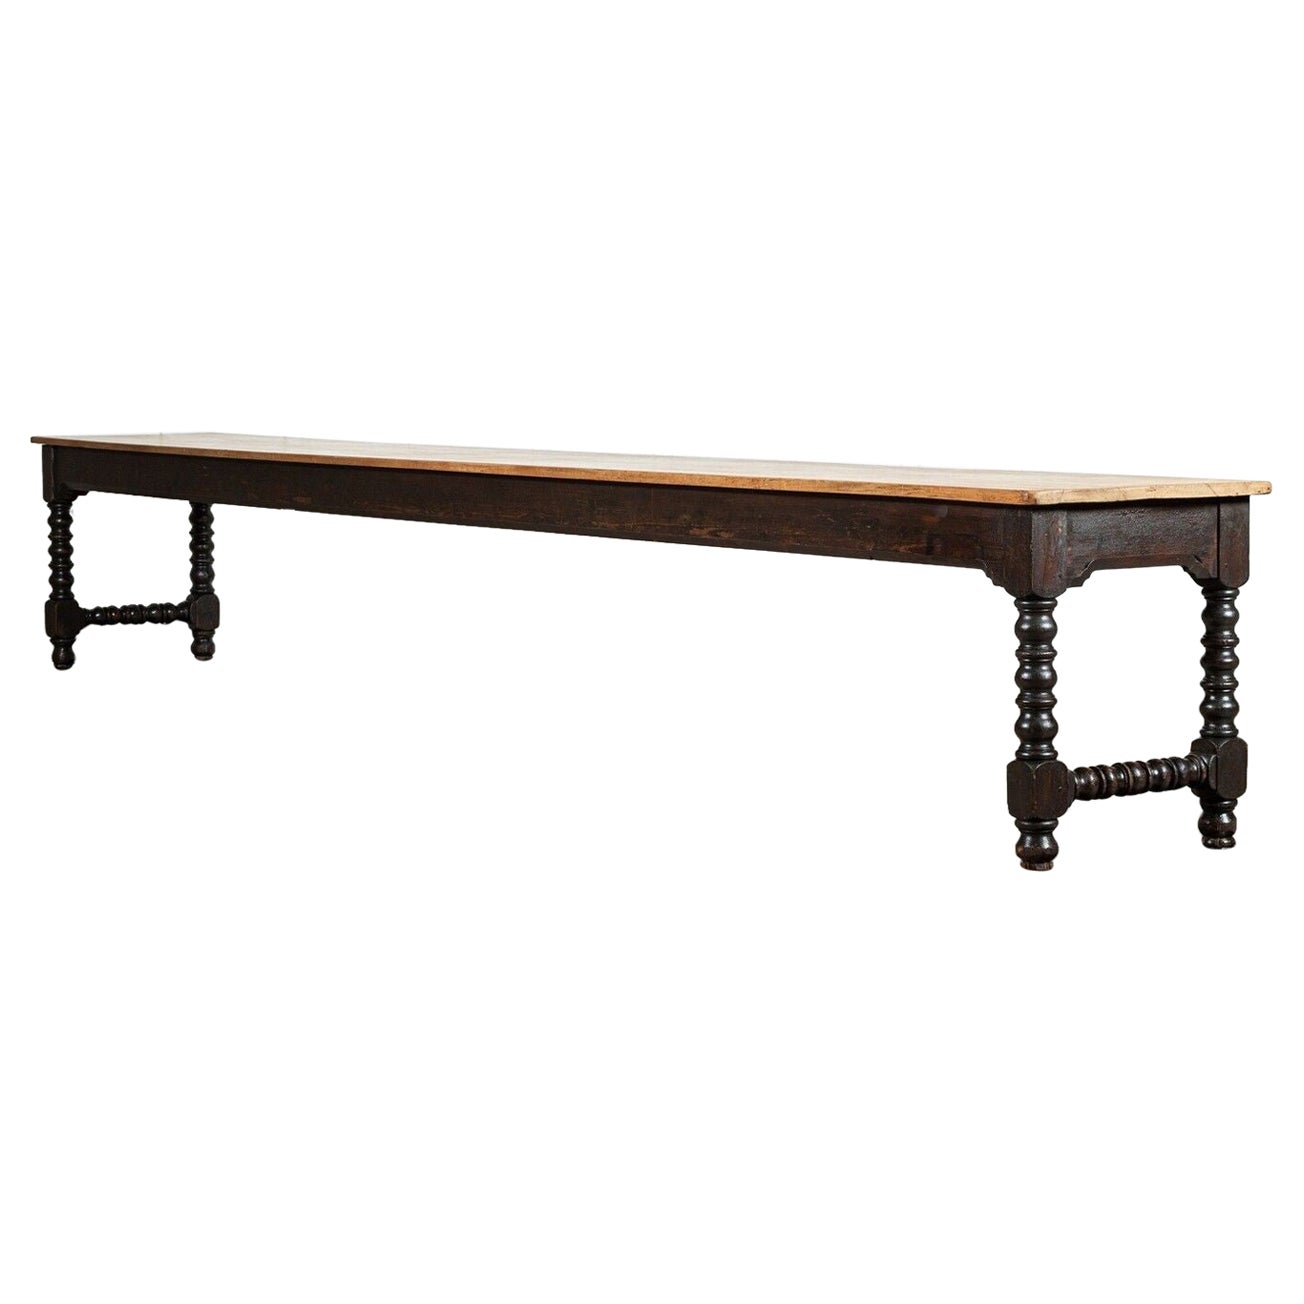 Monumental English 19thC Pine Convent Refectory Table